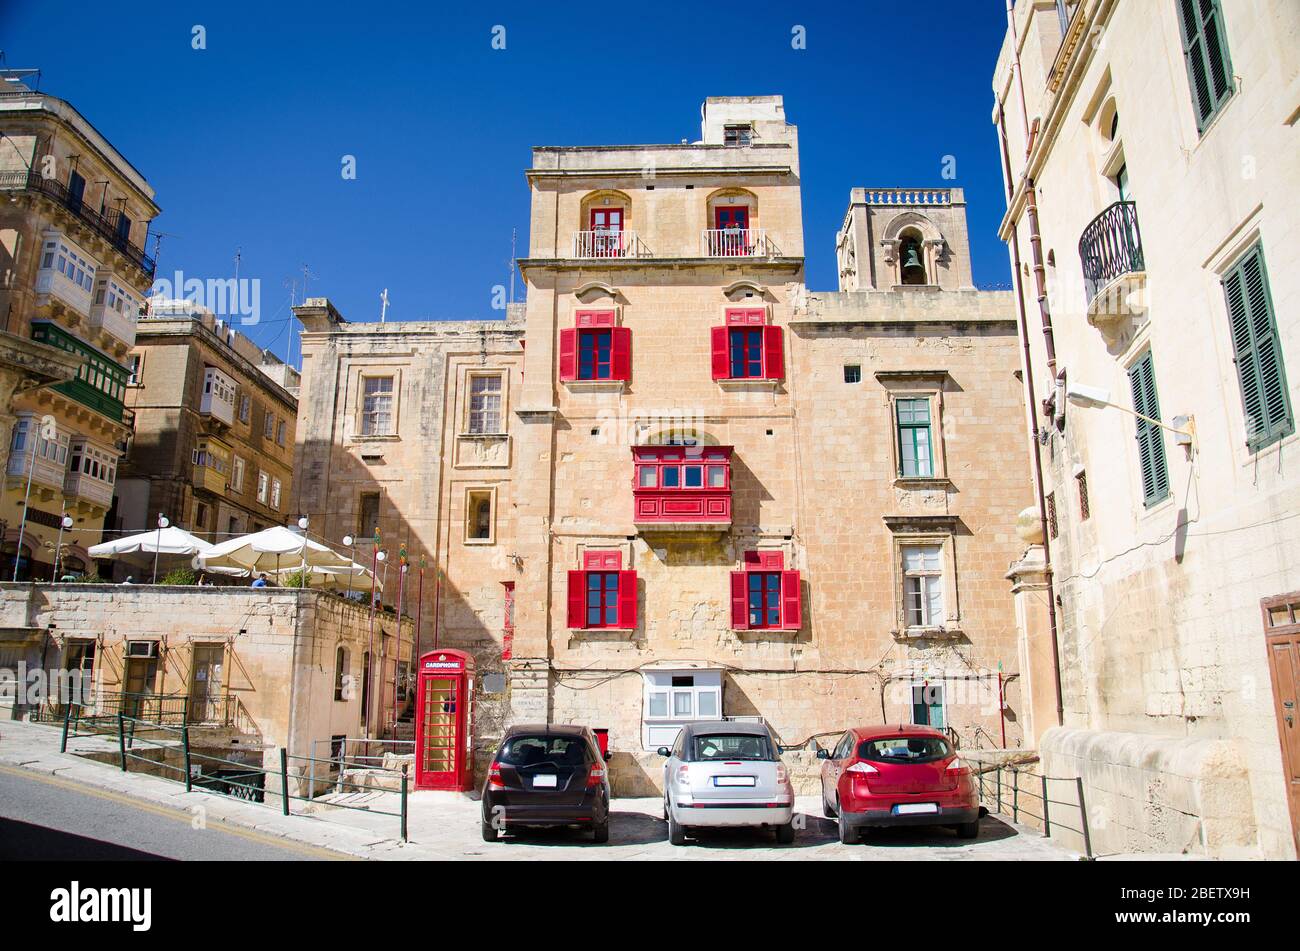 View of yellow buildings with red balconies and windows on the srteets of Valletta, Malta Stock Photo